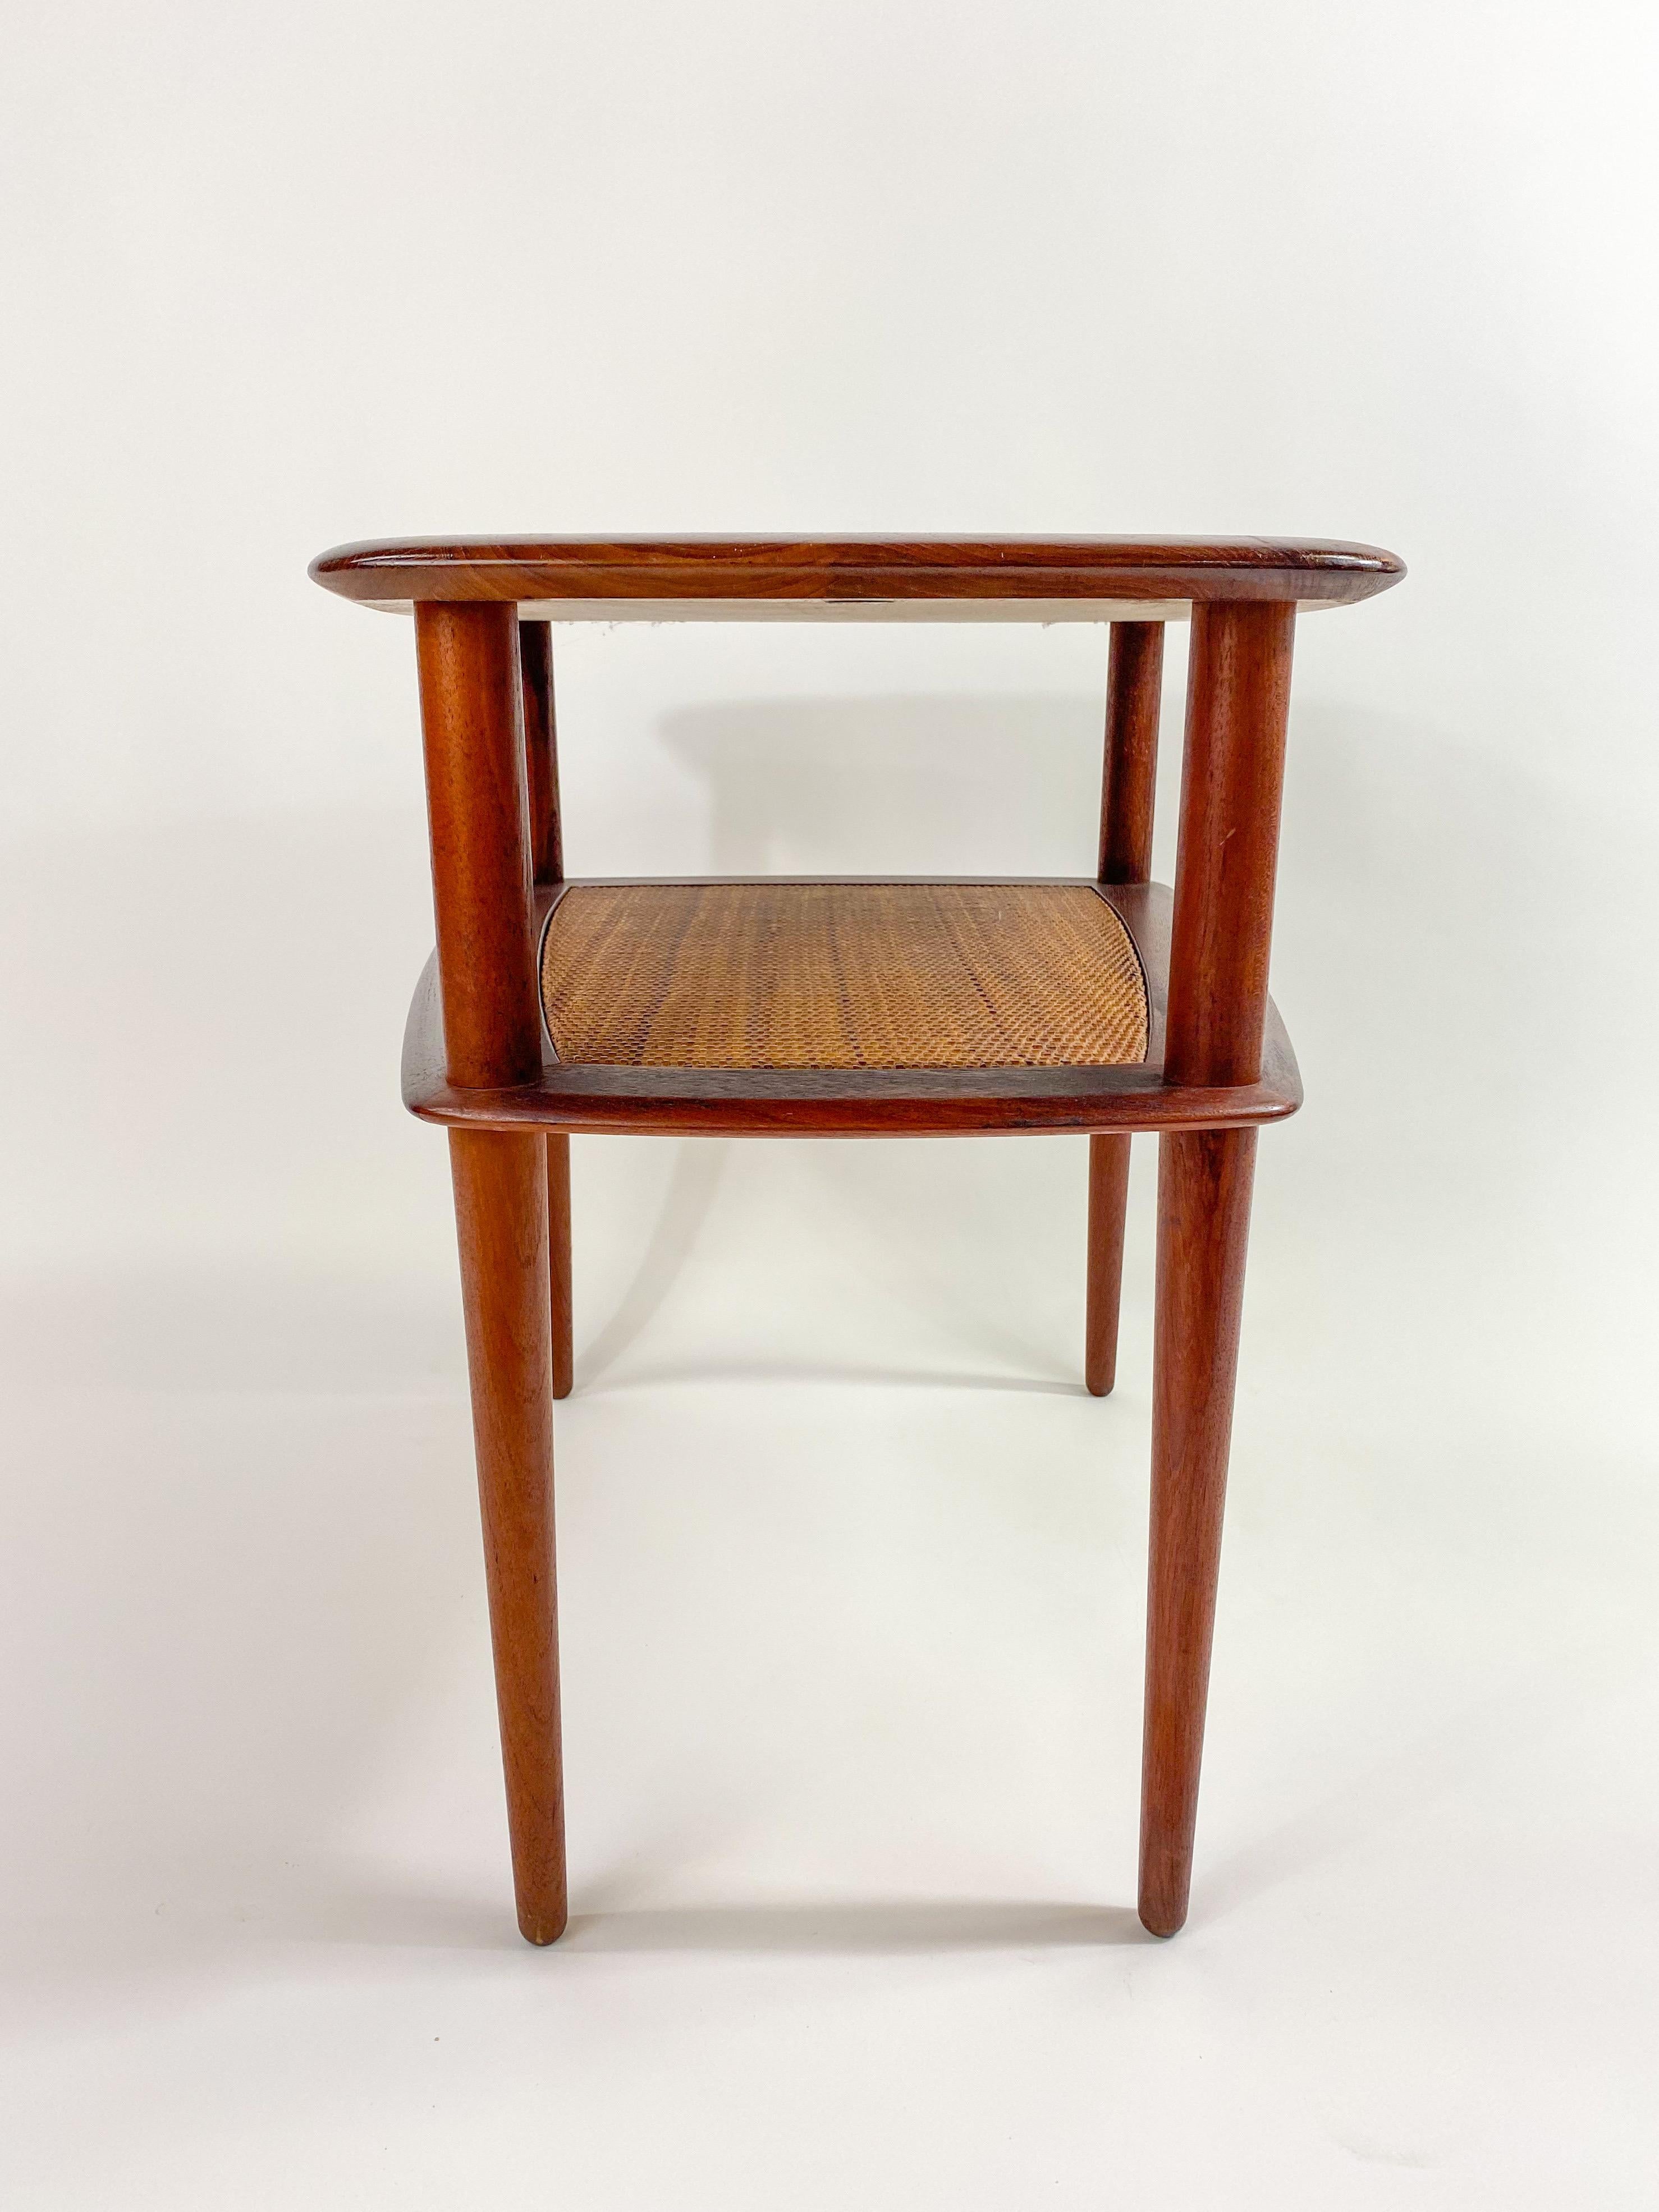 20th Century Mid-Century Modern Danish John Stuart Two Tier Wooden Side or End Table, a Pair